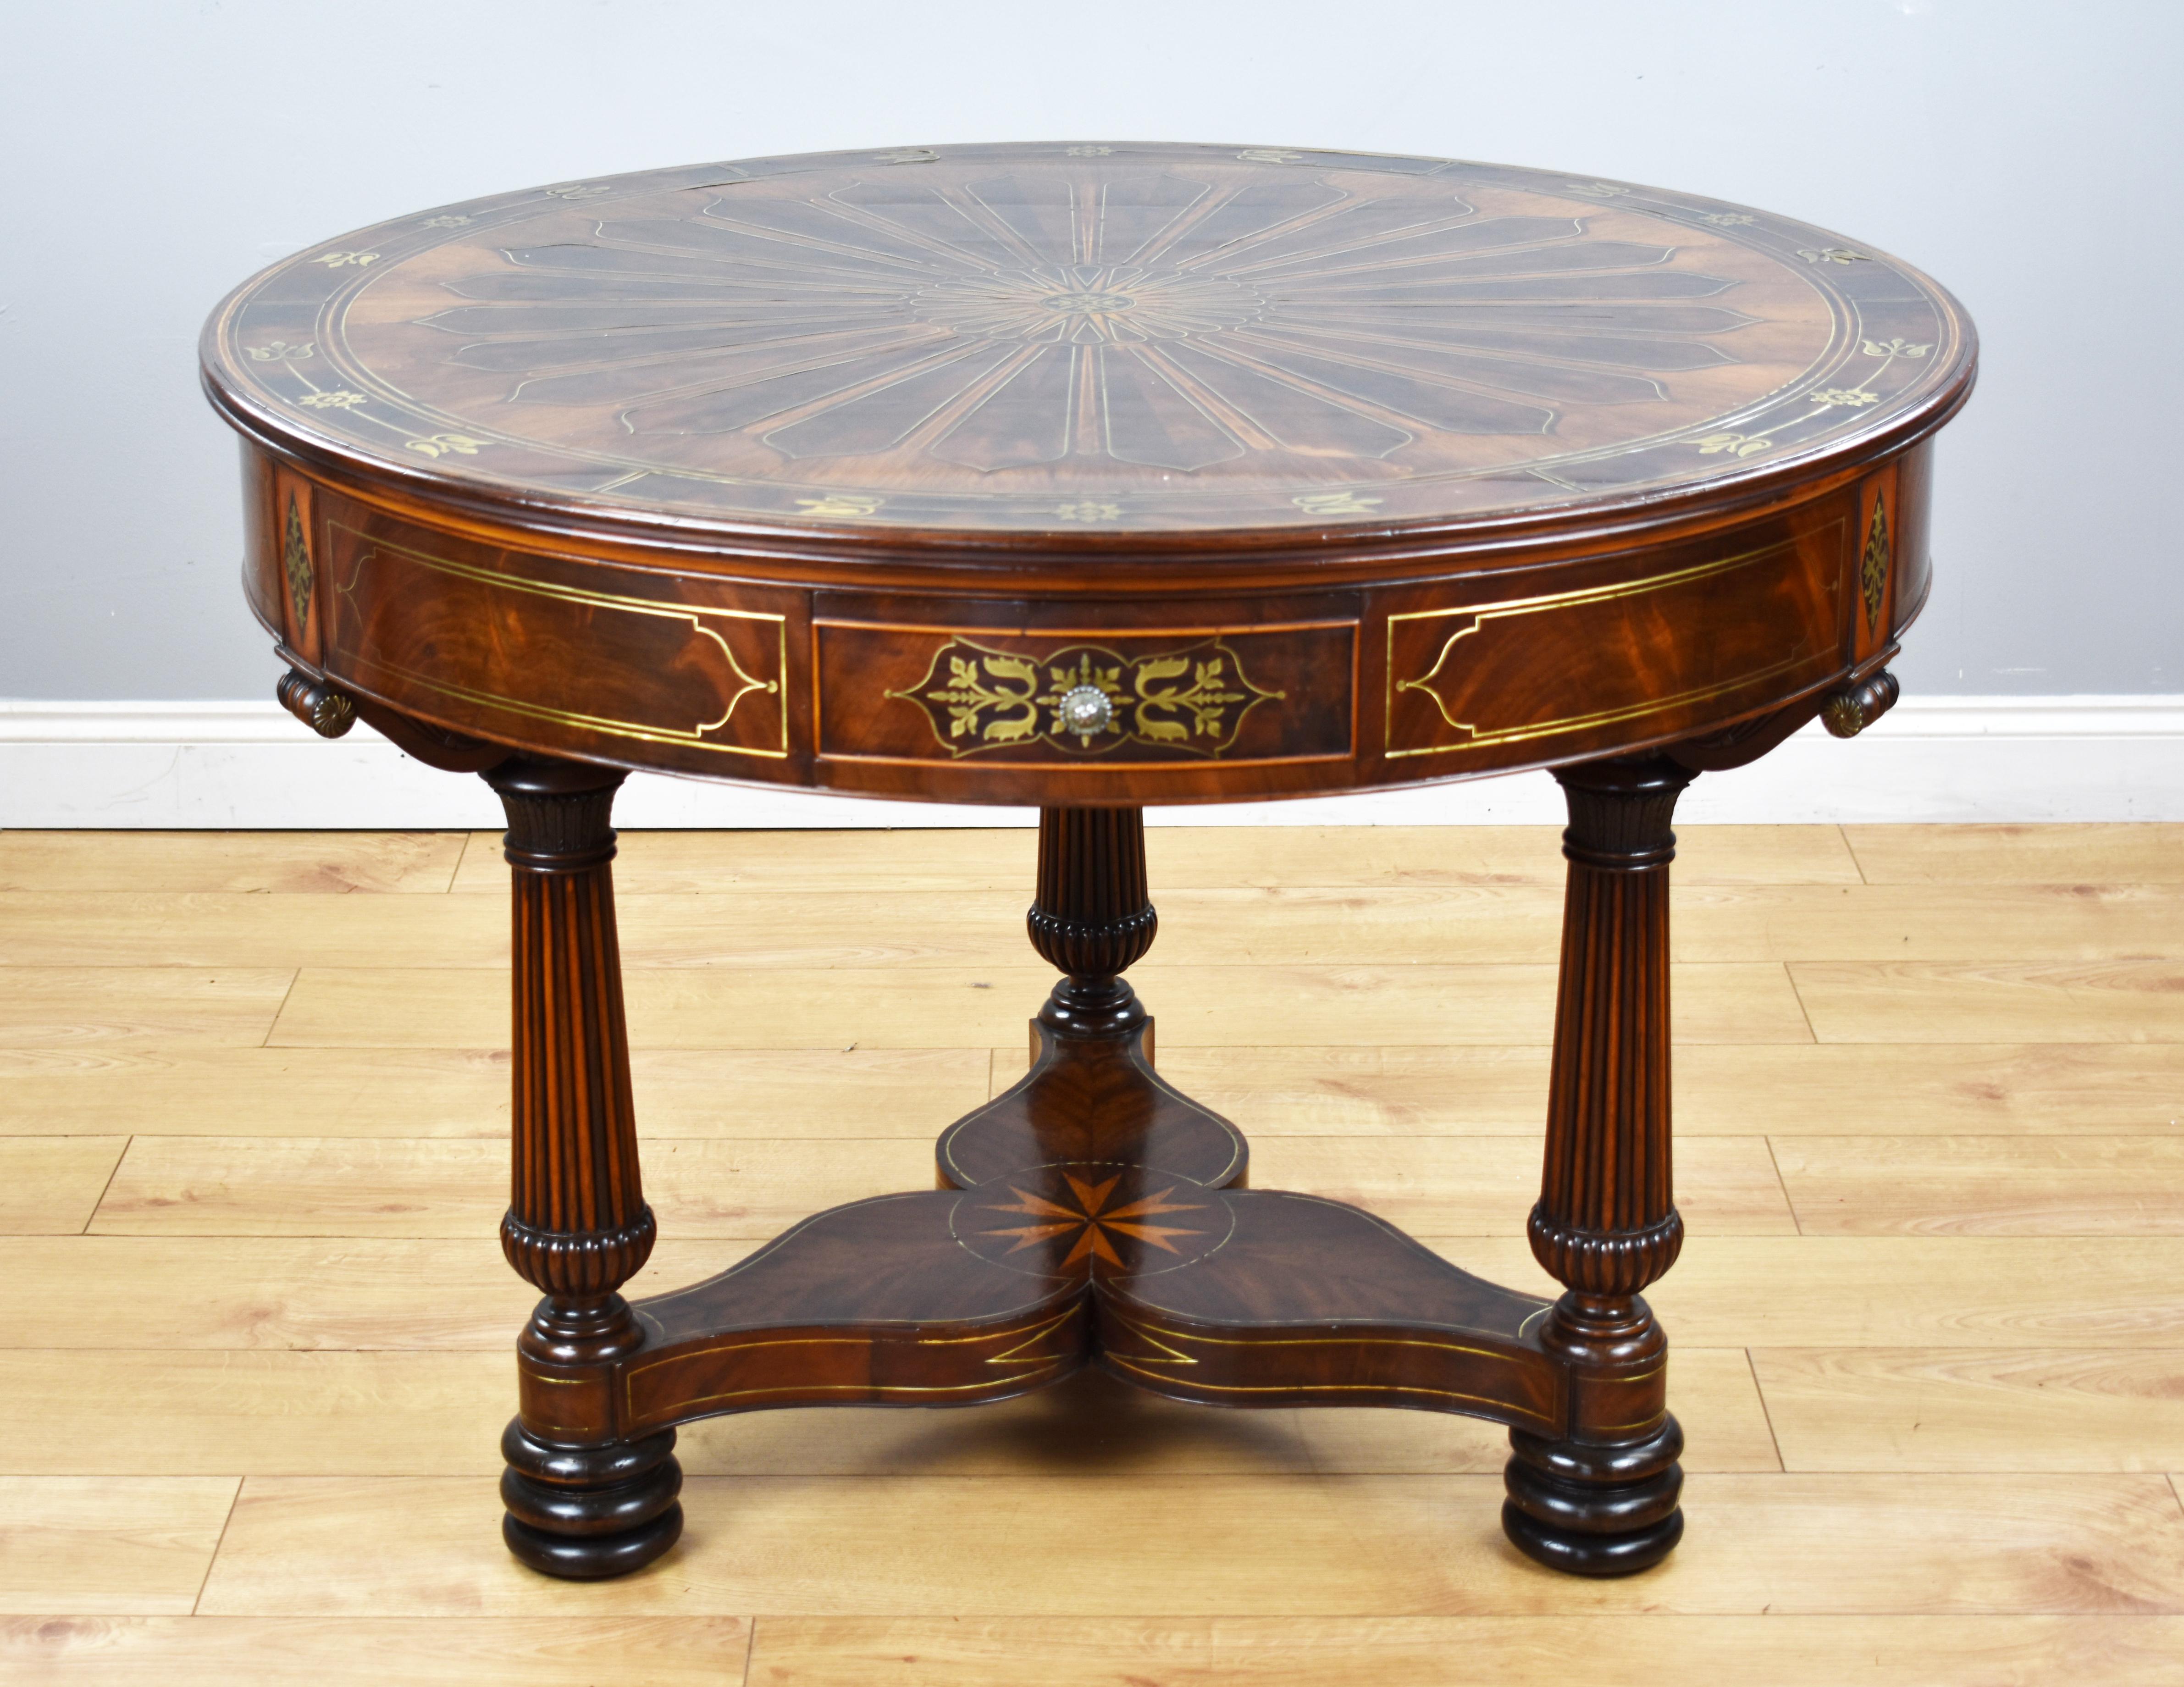 For sale is a fine quality Regency flame mahogany brass inlaid drum table in the manner of John McLean. Having a segmented top flame mahogany veneered and brass inlaid top, surrounding a central star, the paneled frieze fitted with three drawers